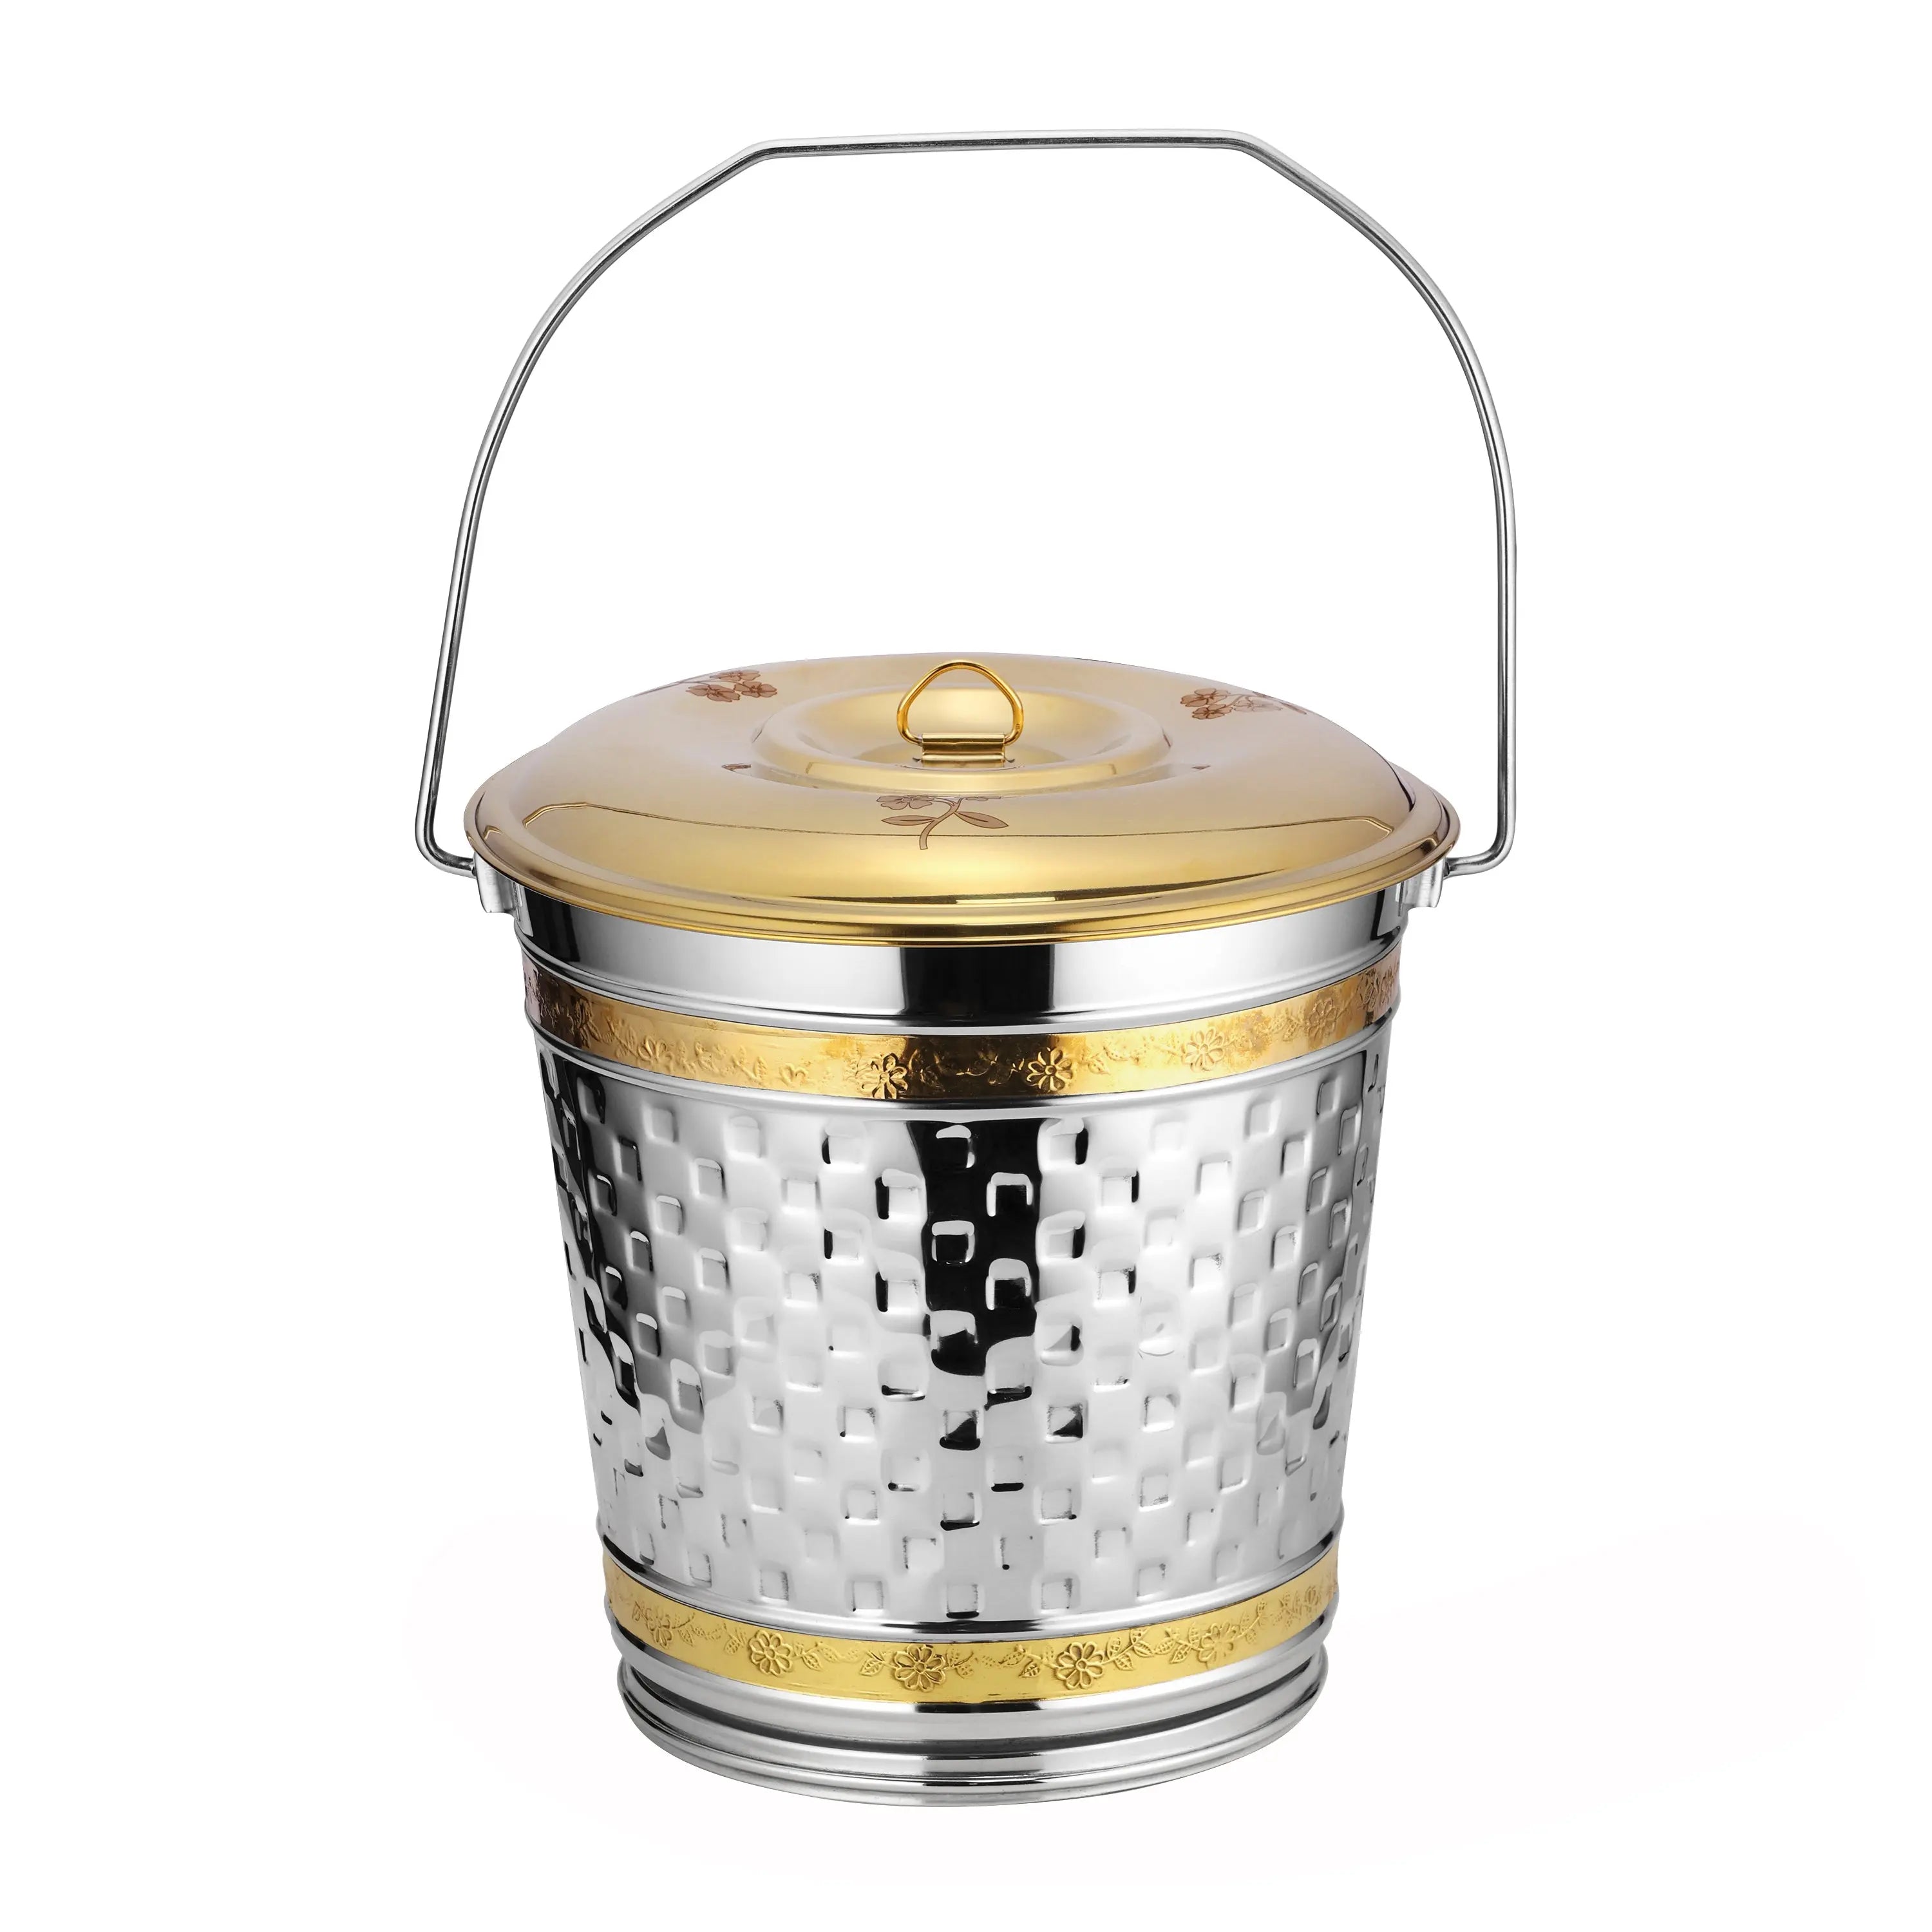 STAINLESS STEEL PVD CHESS BRASS BEADED BUCKET WITH LID - CROCKERY WALA AND COMPANY 